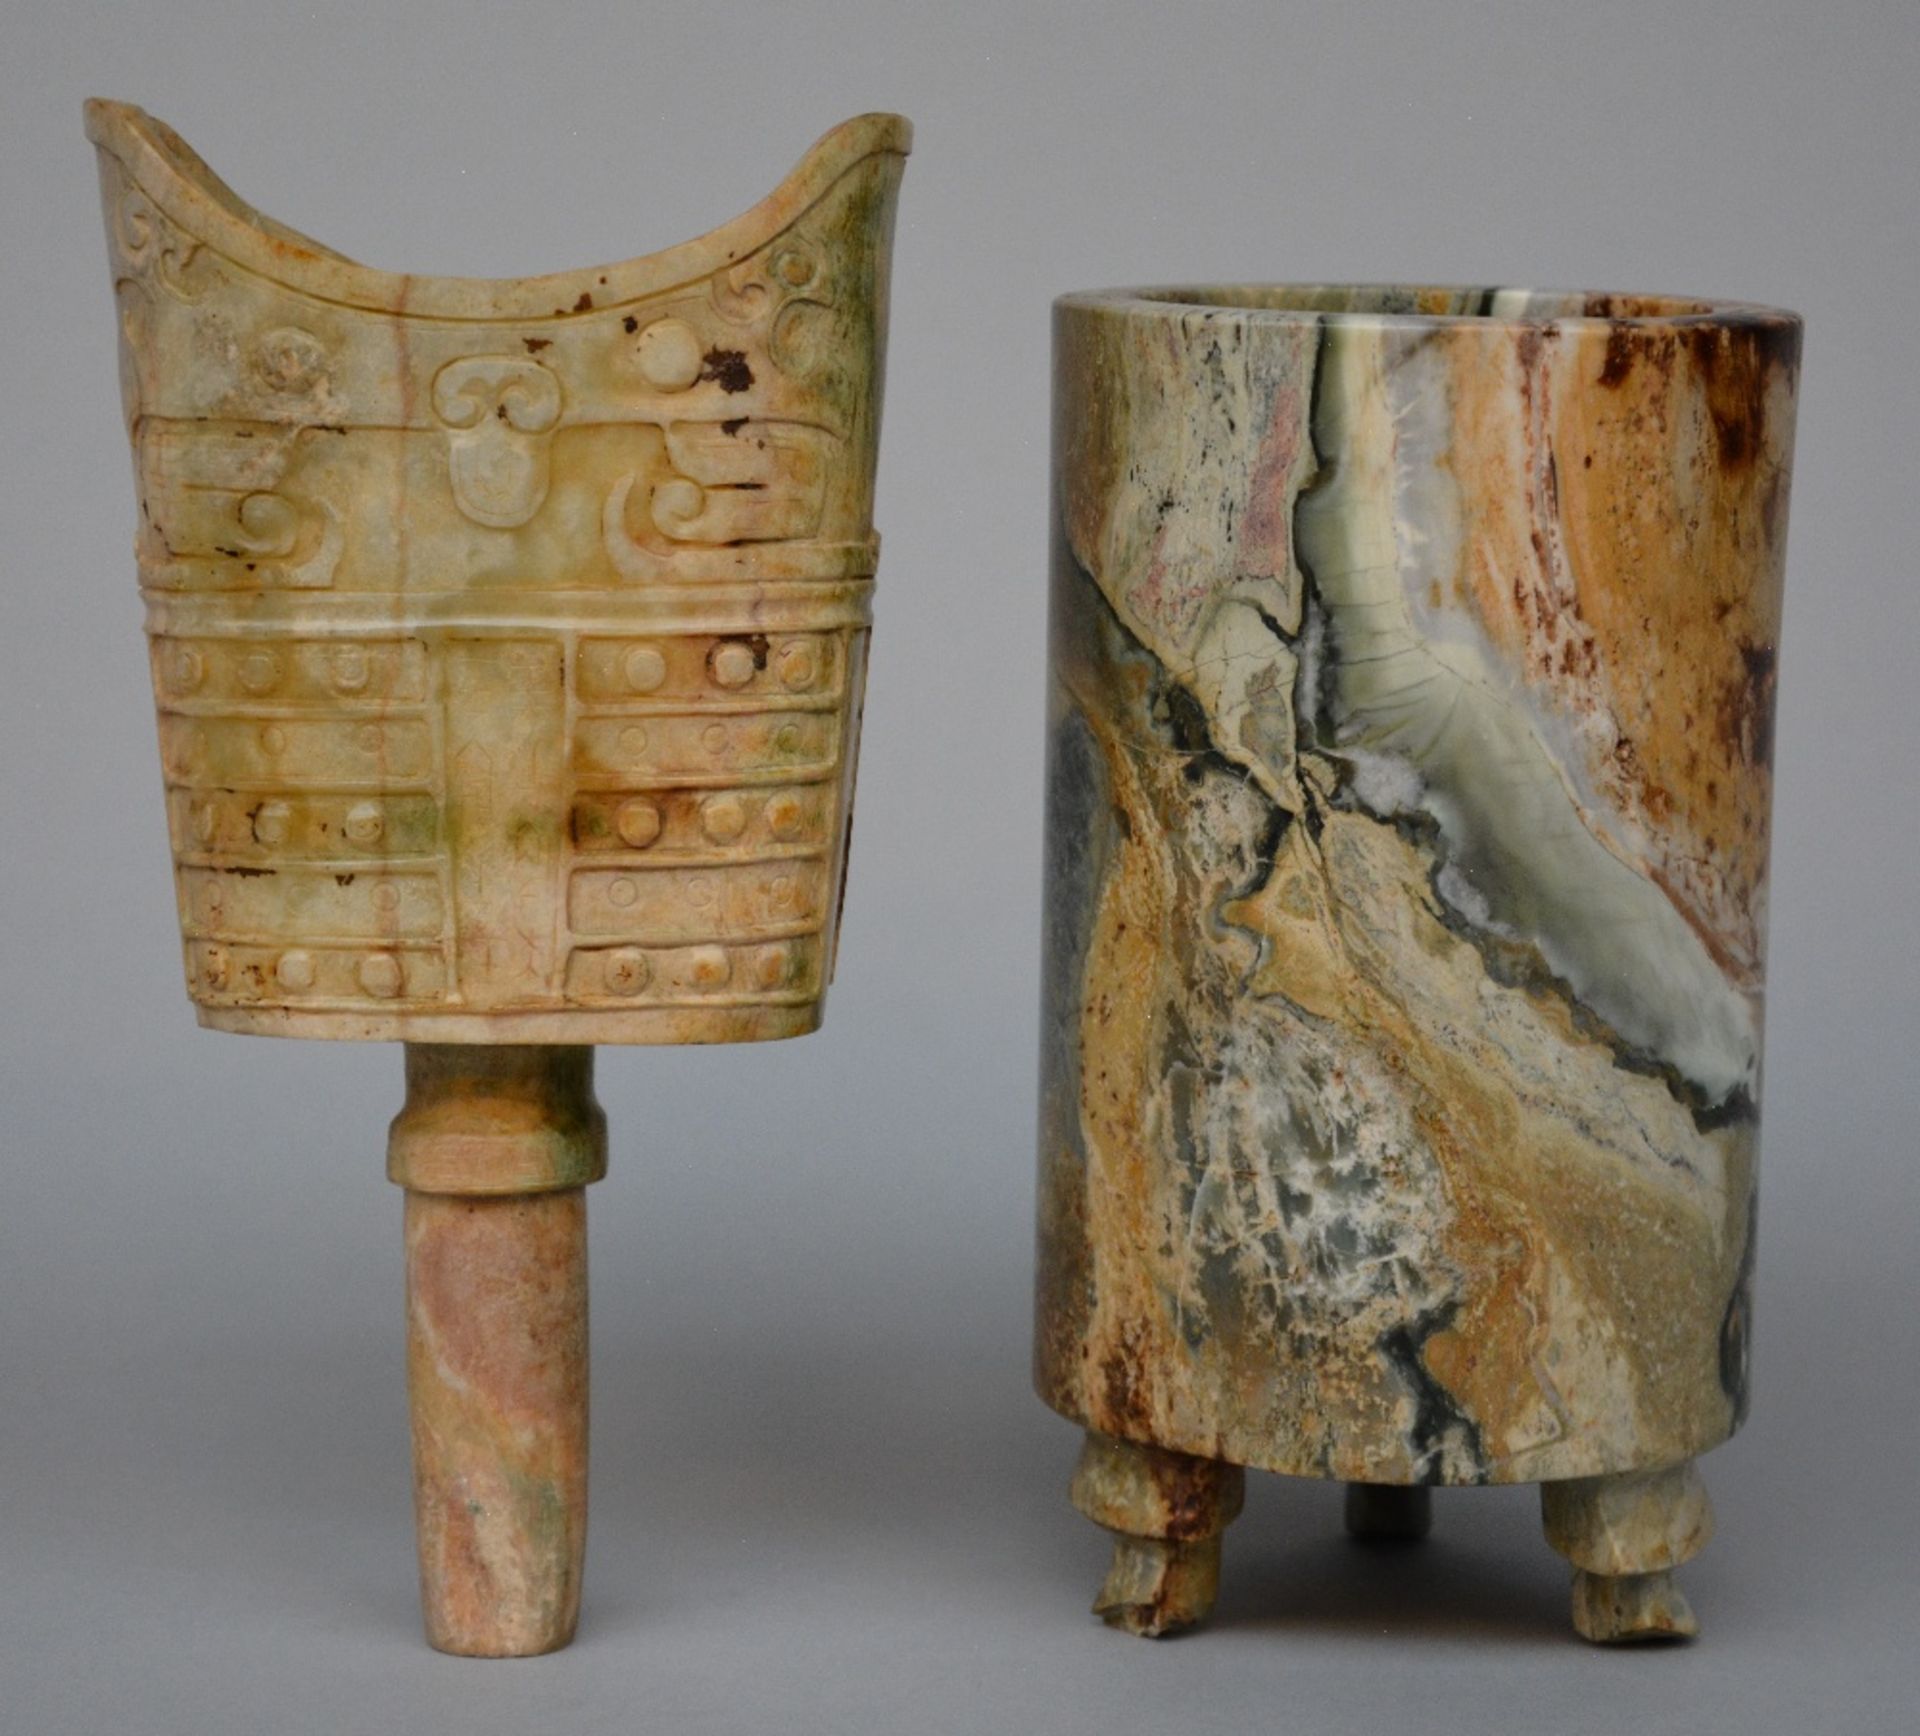 A late 19thC Chinese marble brush pot and ritual bell, H 18,5 - 21 cm (two feet of the brush pot